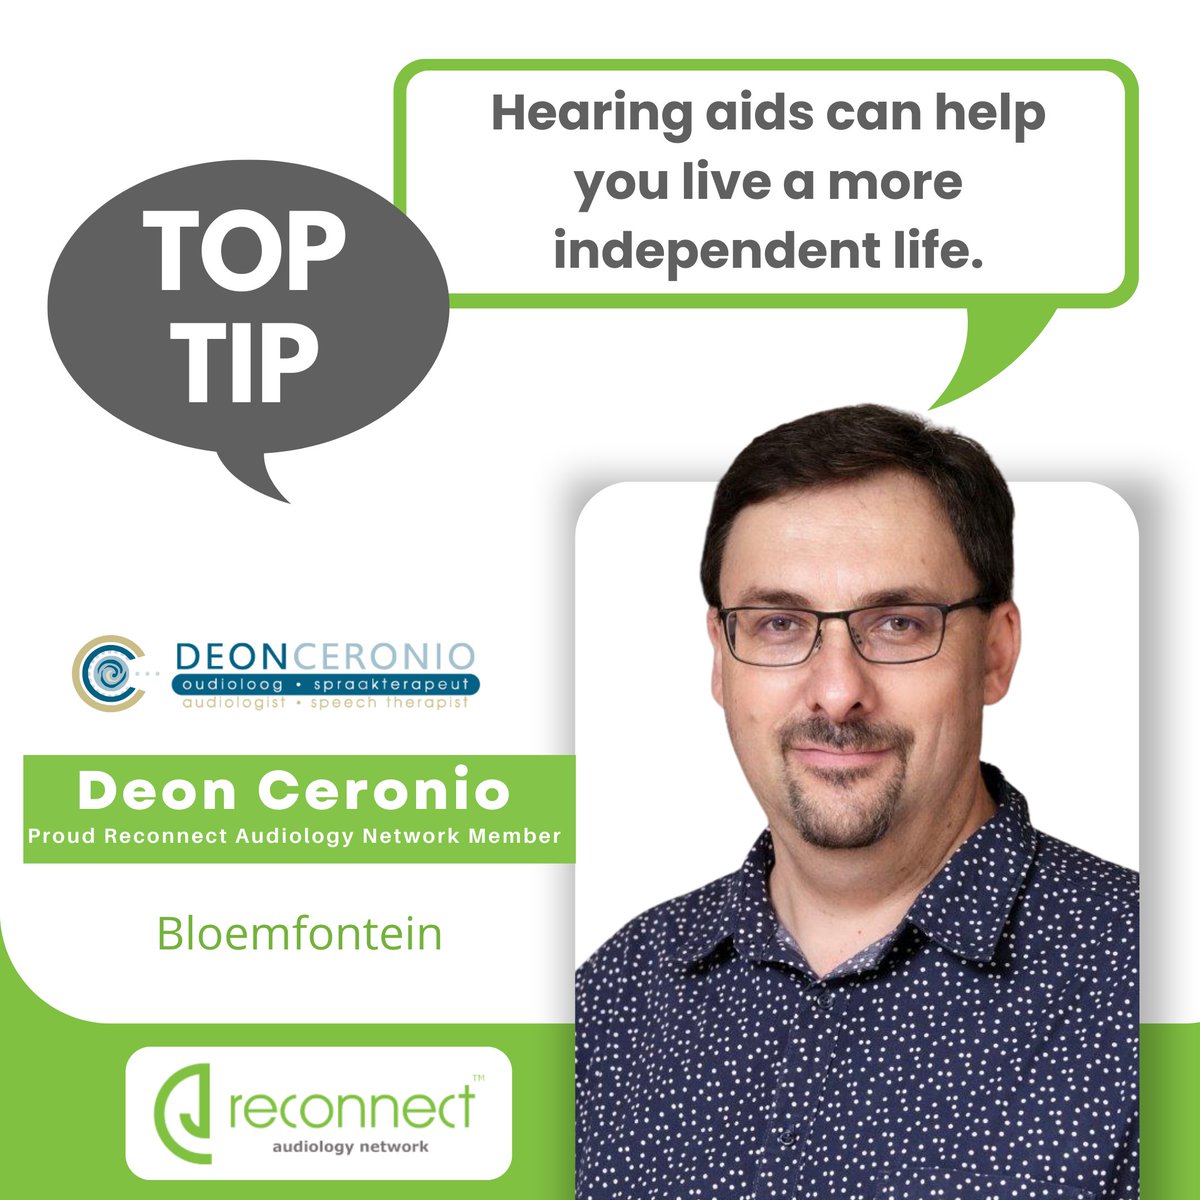 Today #Audiologist in #IndependentPractice Deon Ceronio from Deon Ceronio Hearing Centre shares a tip about your hearing health.

Hearing aids can help you live a more independent life.

You can contact Deon Ceronio here 📲 051 447 4070